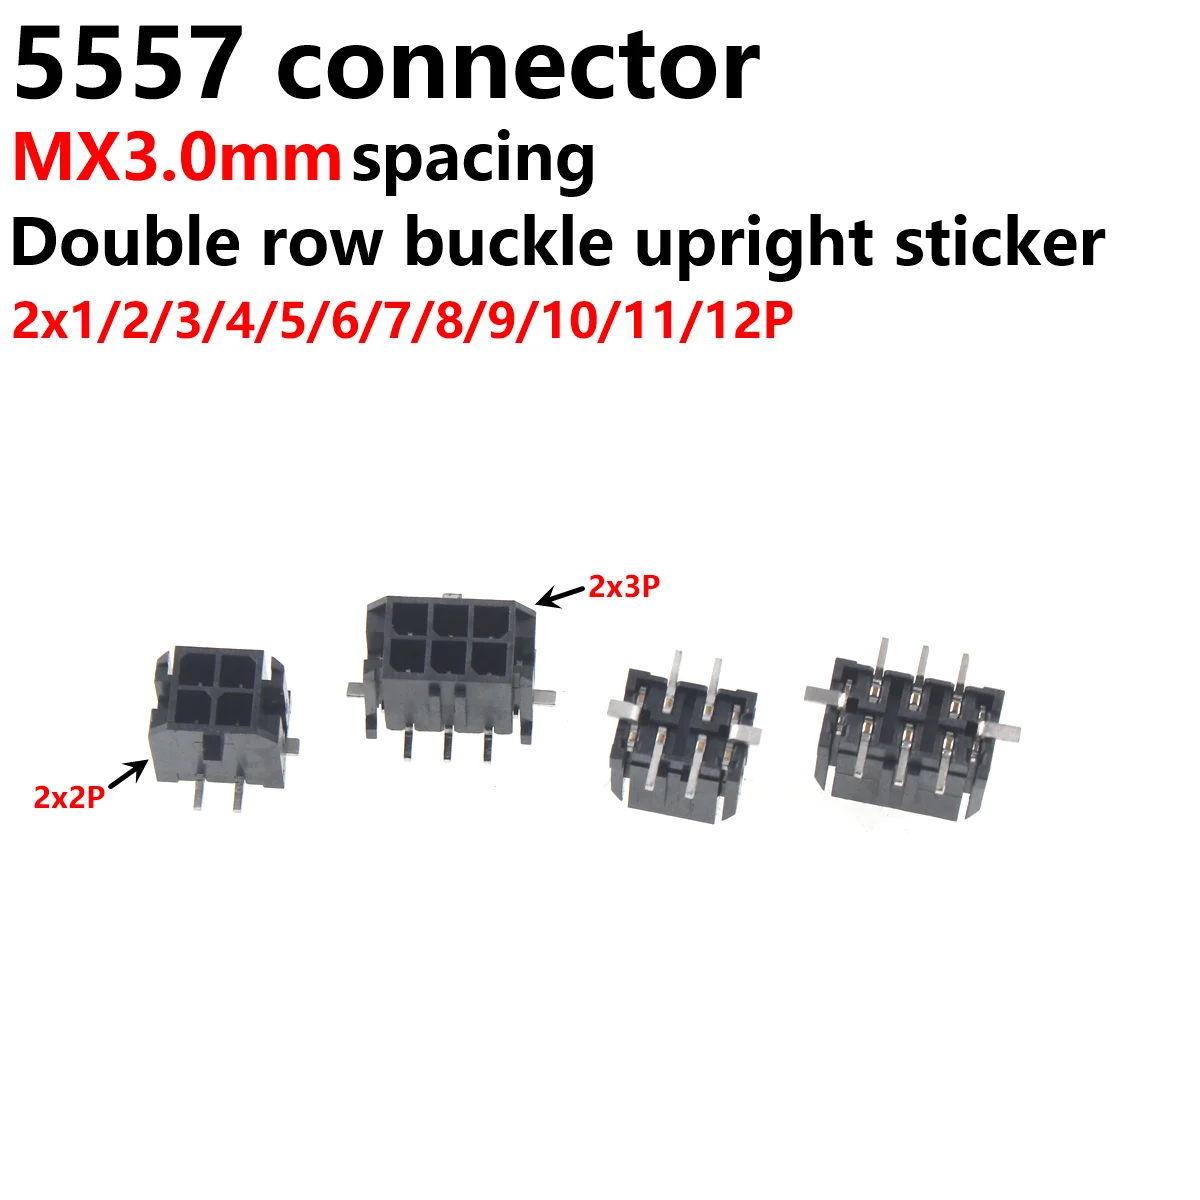 10pcs Micro-fit MX3.0 3.0mm Connector Double Row SMT SMD Type 2P 4P 6P 8P 10 12 14 24pin 43045 receptacle Socket 5 10pcs 100% new zx62d ab 5p8 5p usb 2 0 micro ab new original connector